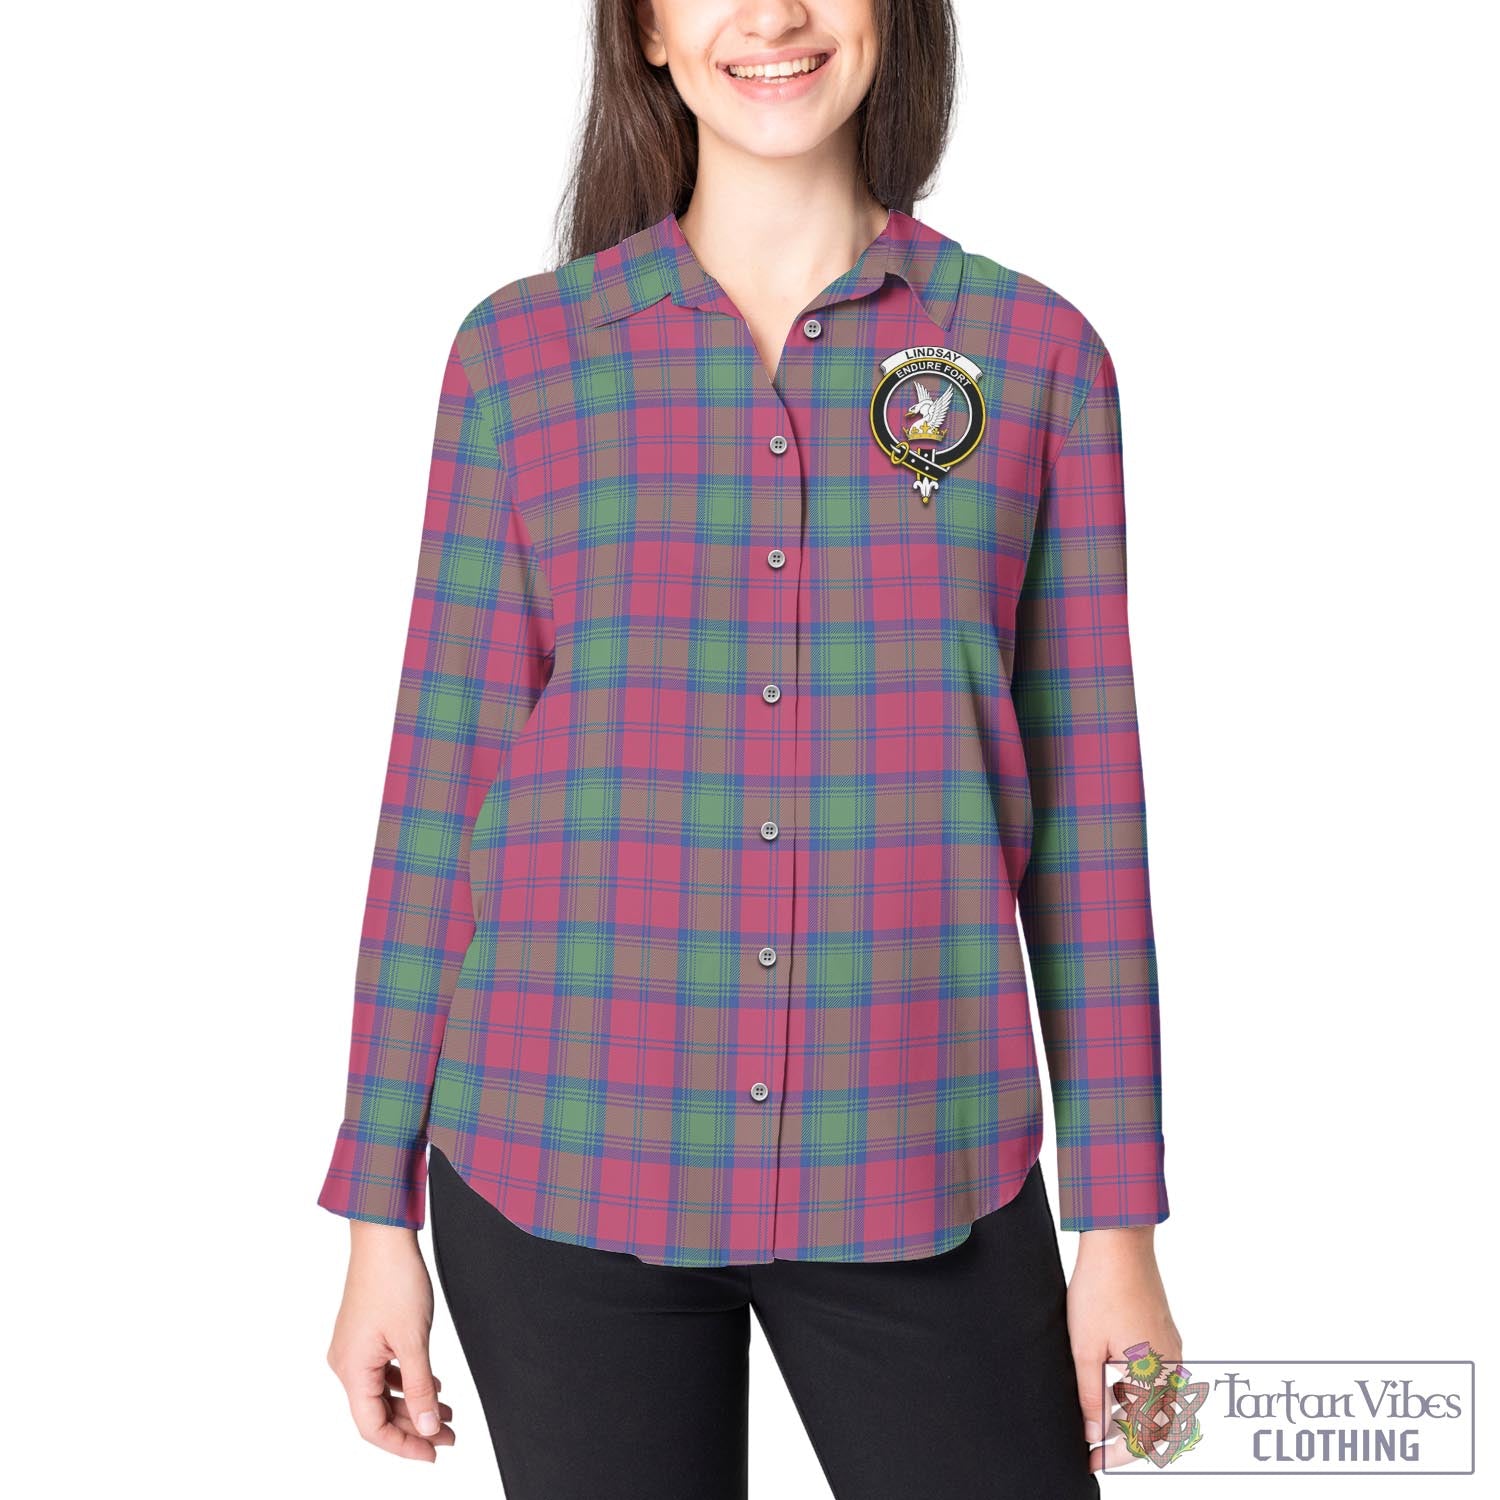 Tartan Vibes Clothing Lindsay Ancient Tartan Womens Casual Shirt with Family Crest